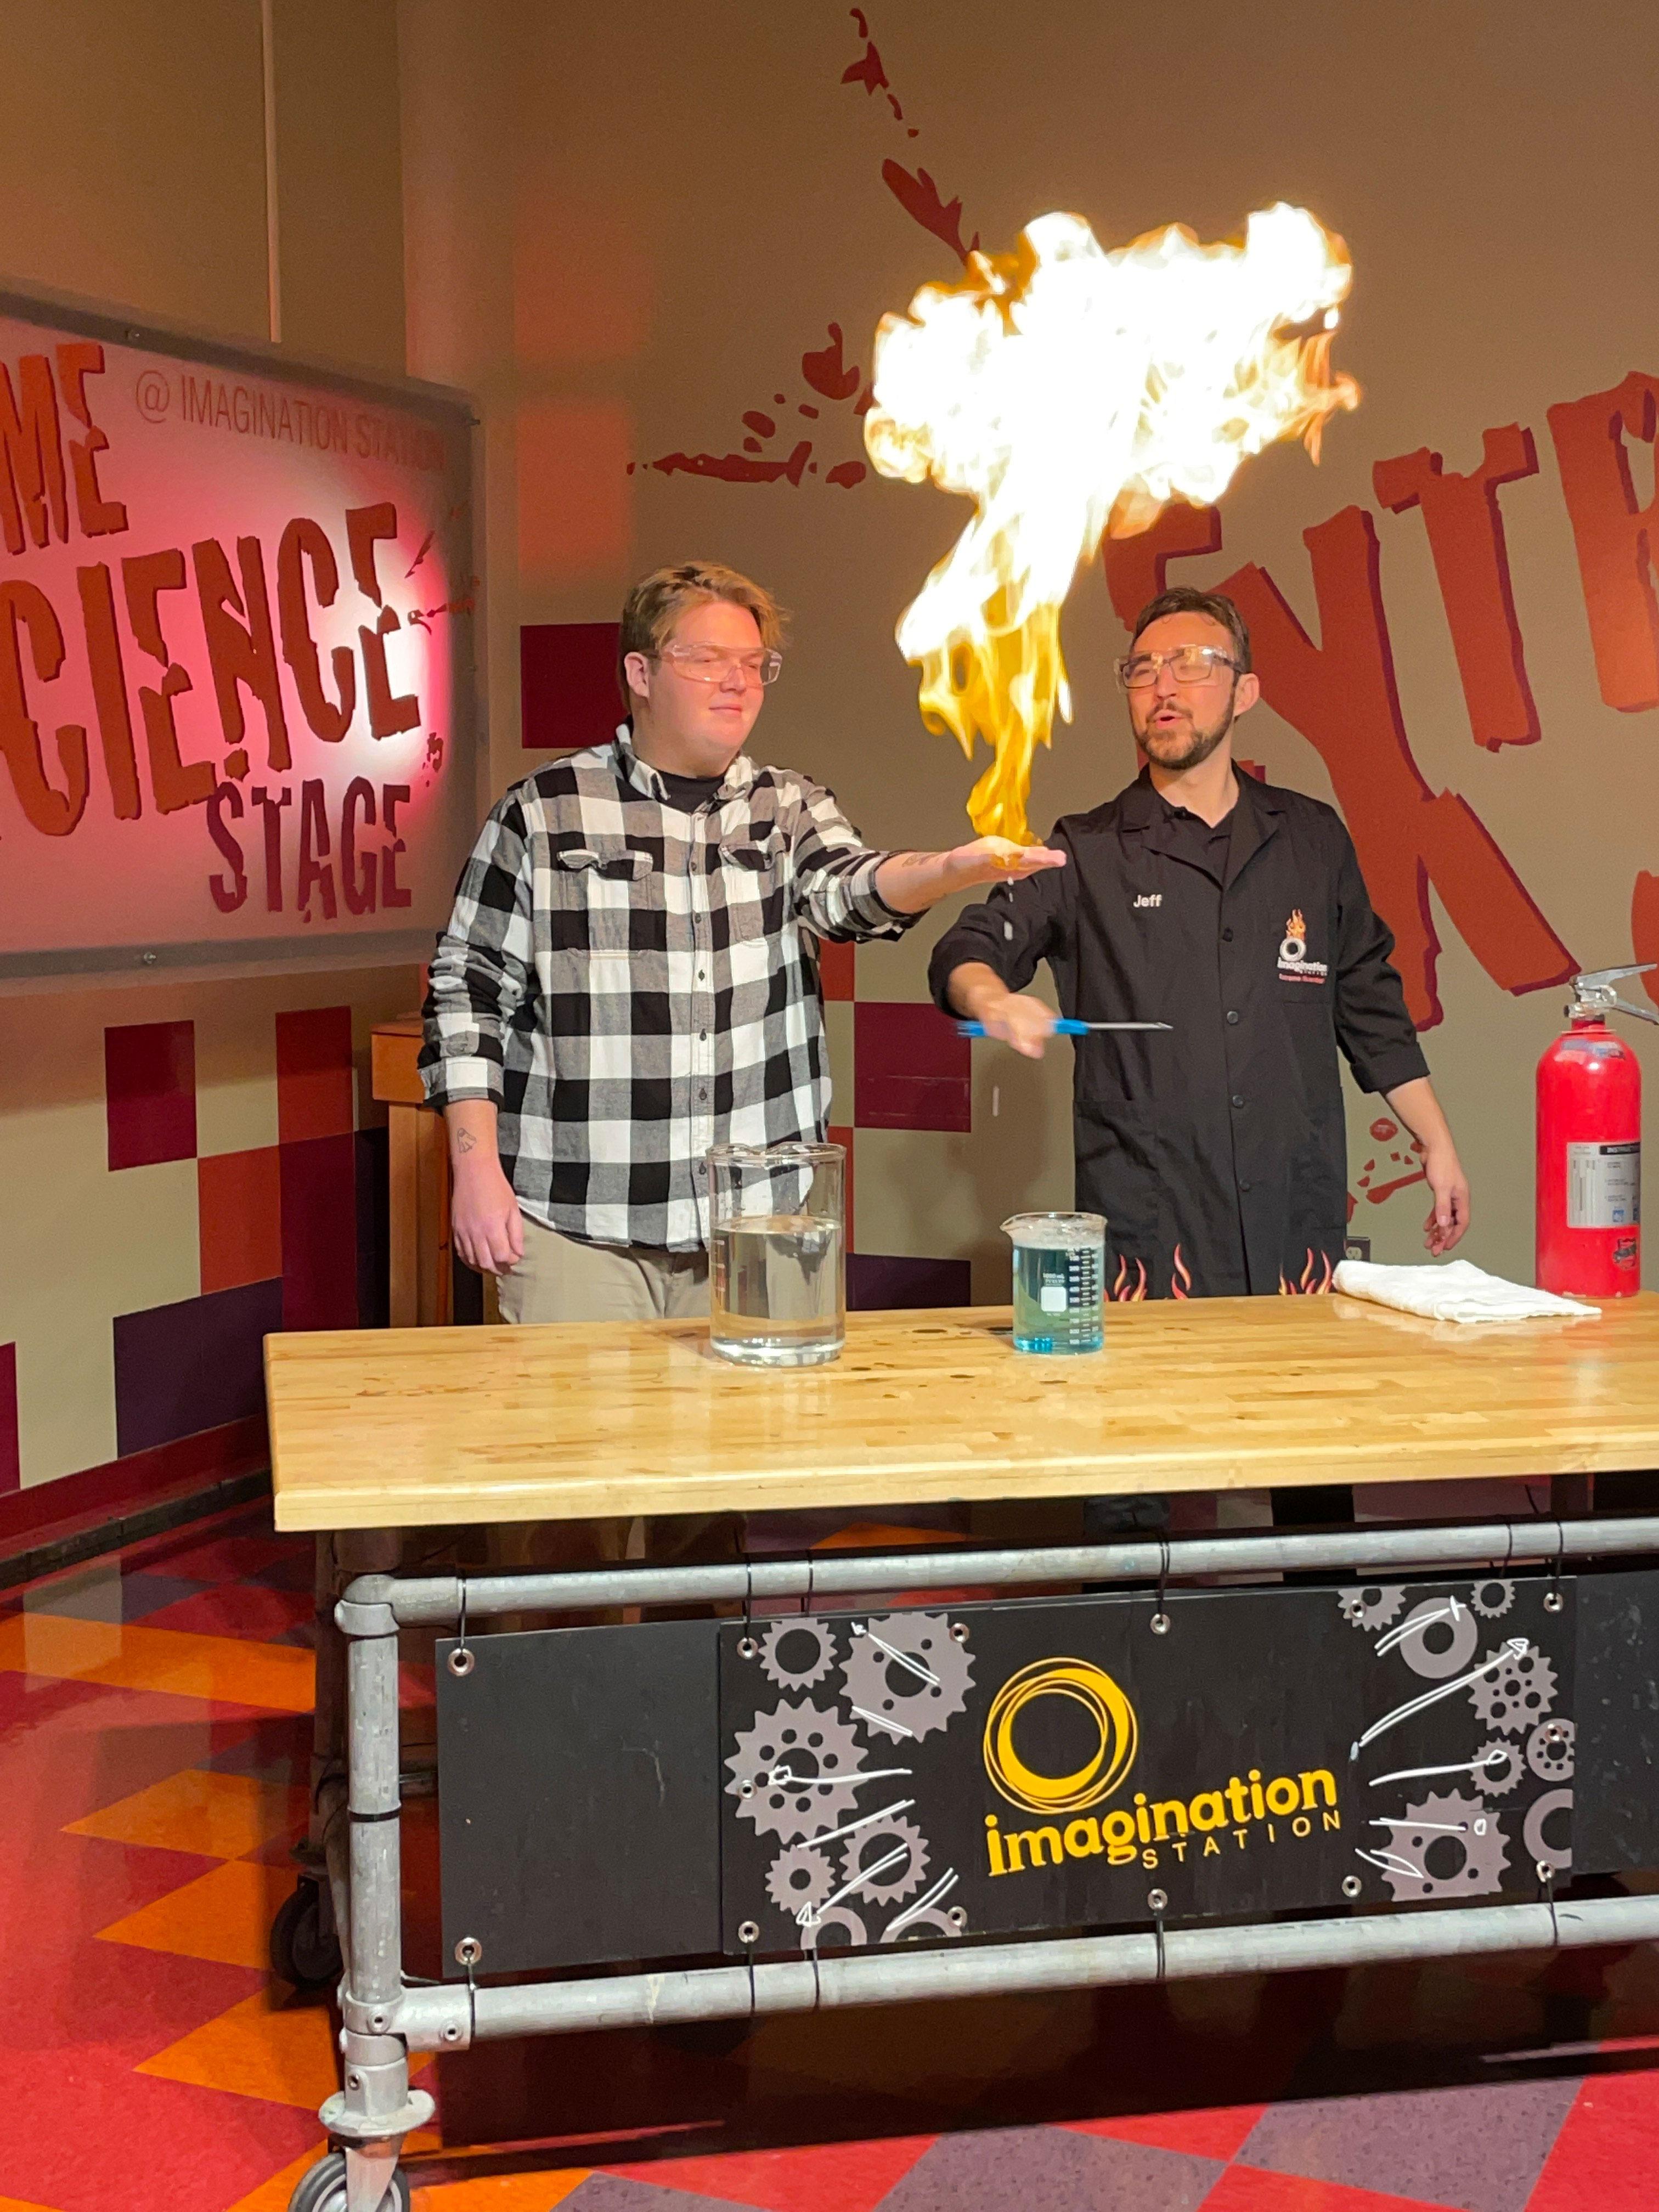 Filming experiments with fire at the Imagination Station